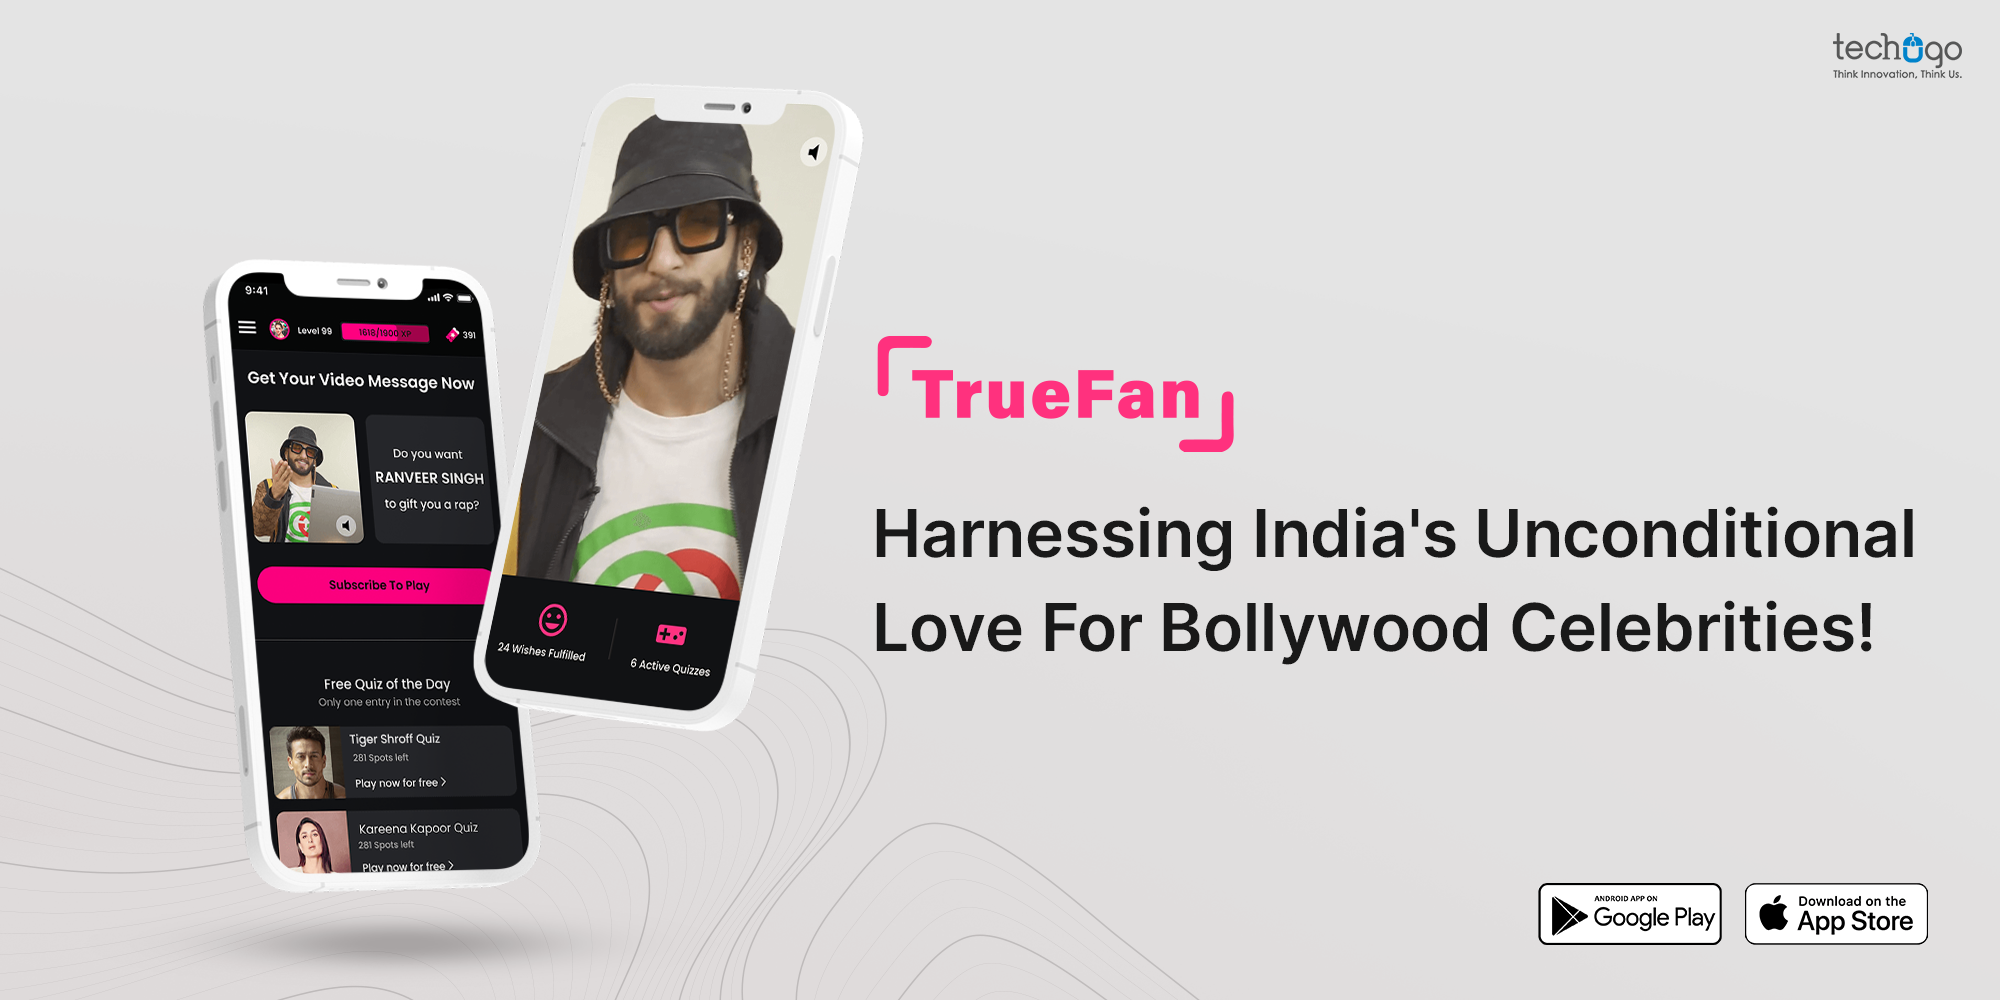 TrueFan- Harnessing India’s Unconditional Love For Bollywood Celebrities!